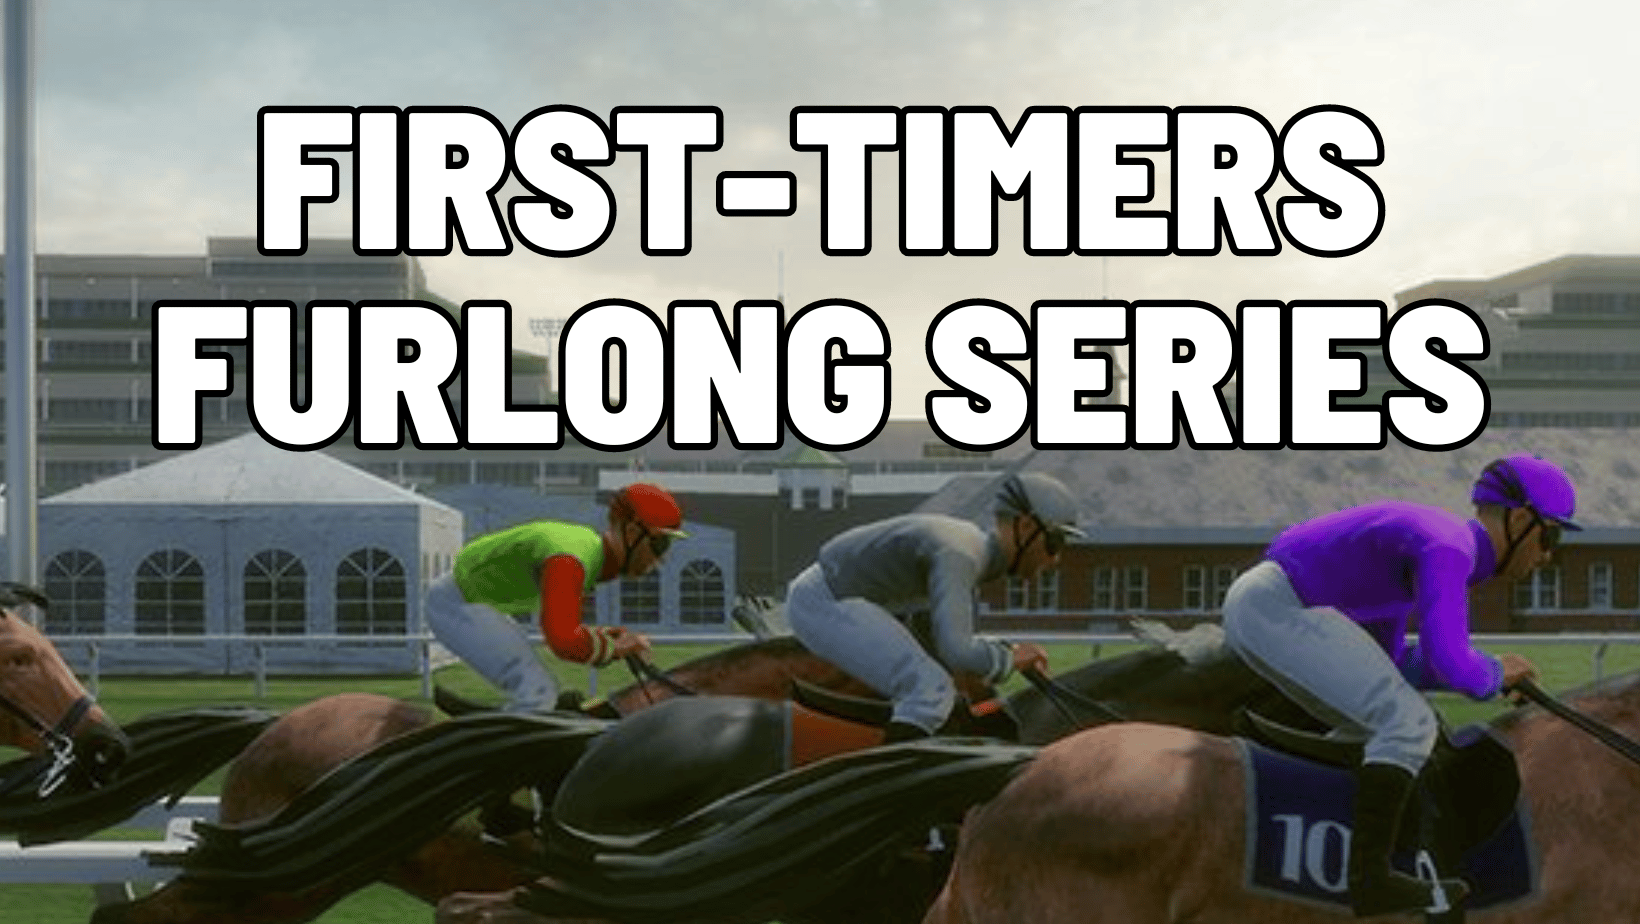 Win a Free Horse: Introducing the First-Timers Furlong Series